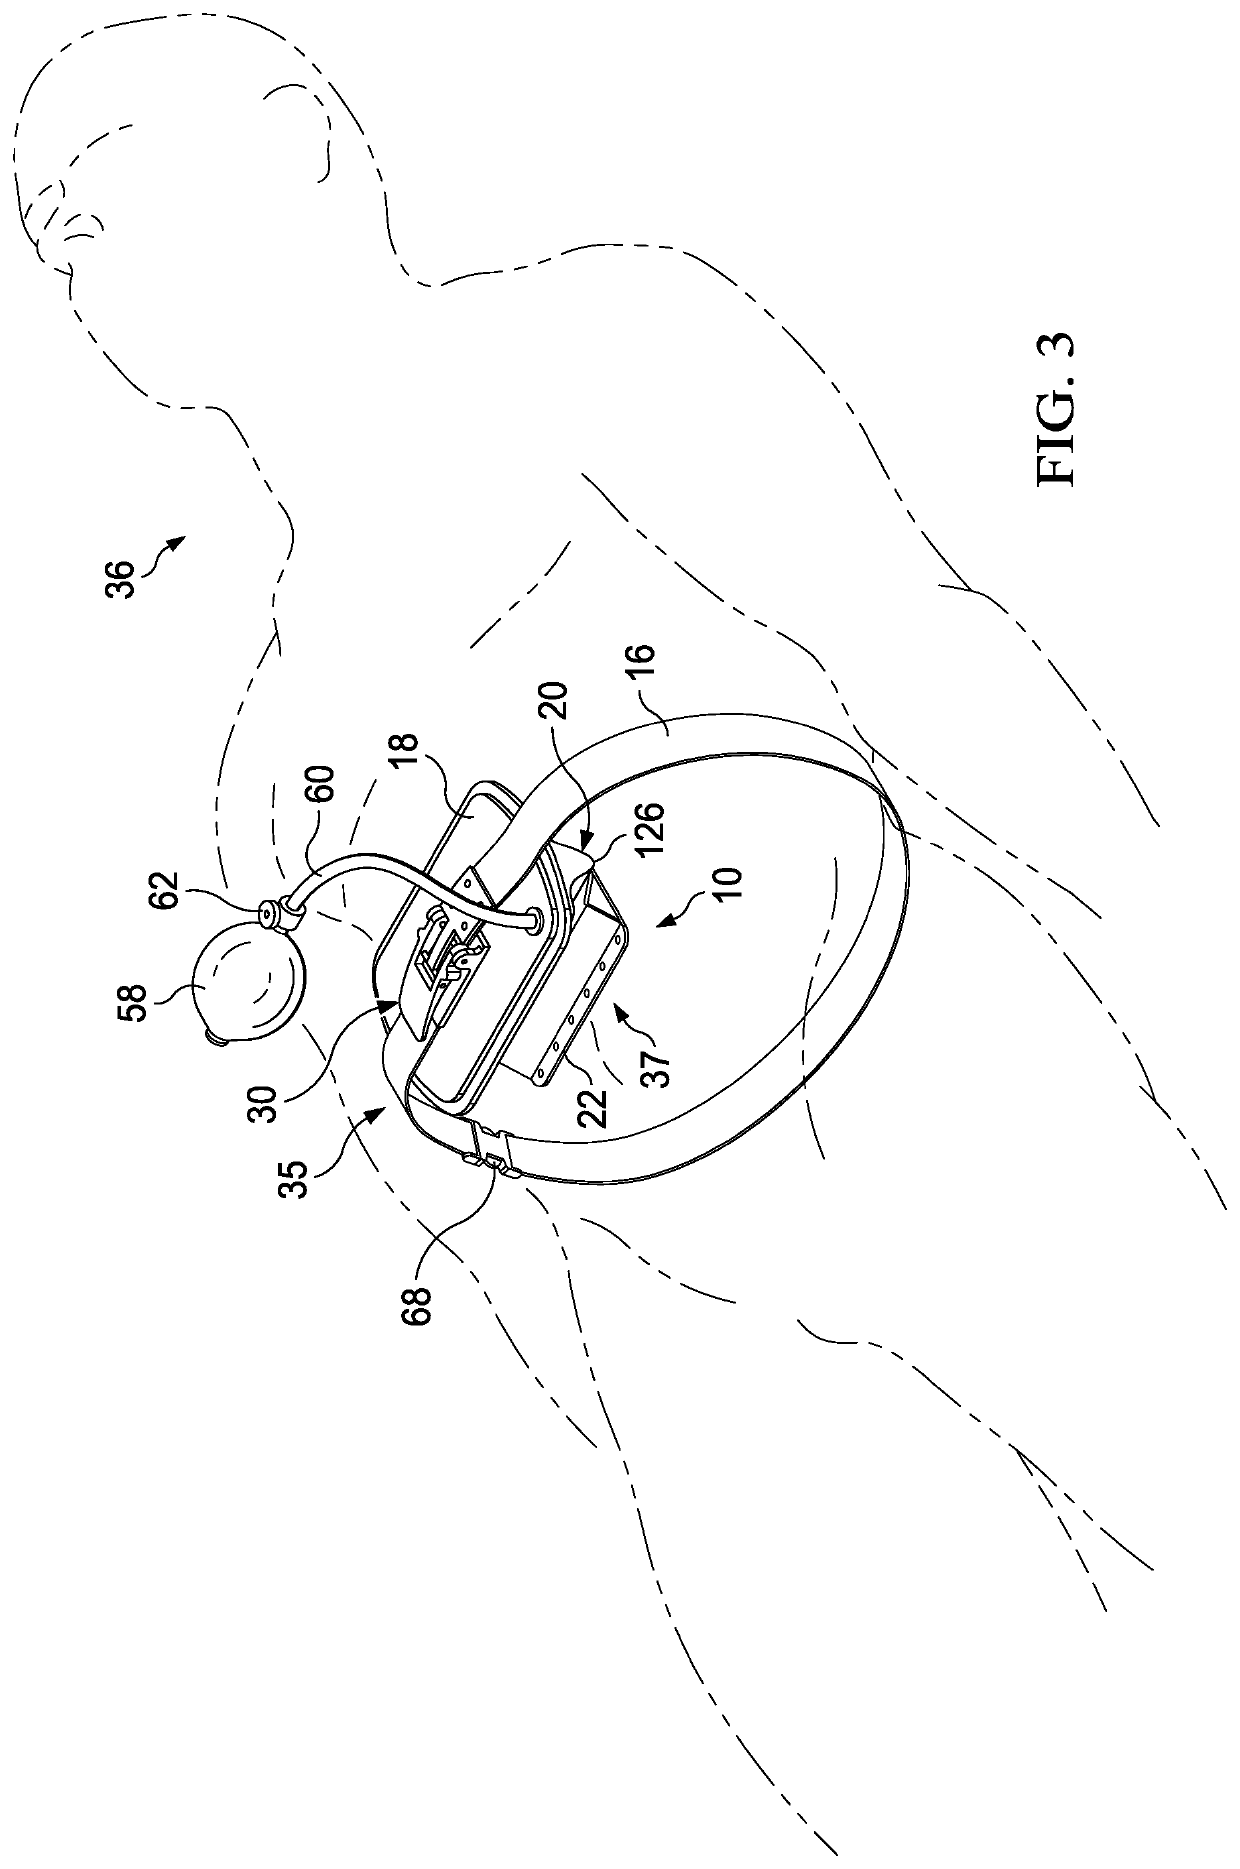 Device to increase intra-abdominal compartment pressure for the controlling of internal hemorrhage